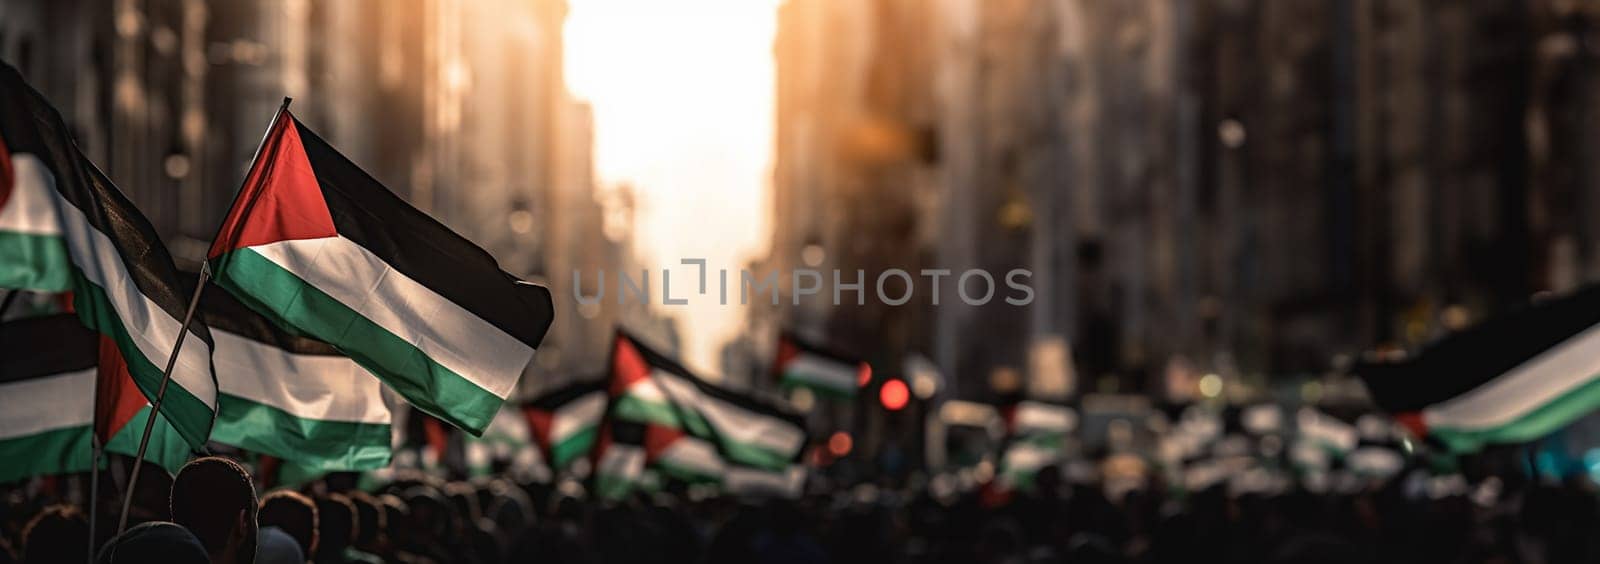 Palestinian Freedom Protest. Conflict and war concept. Palestina vs Israel. People of Palestina raising Flags in the city Copy space Space for text